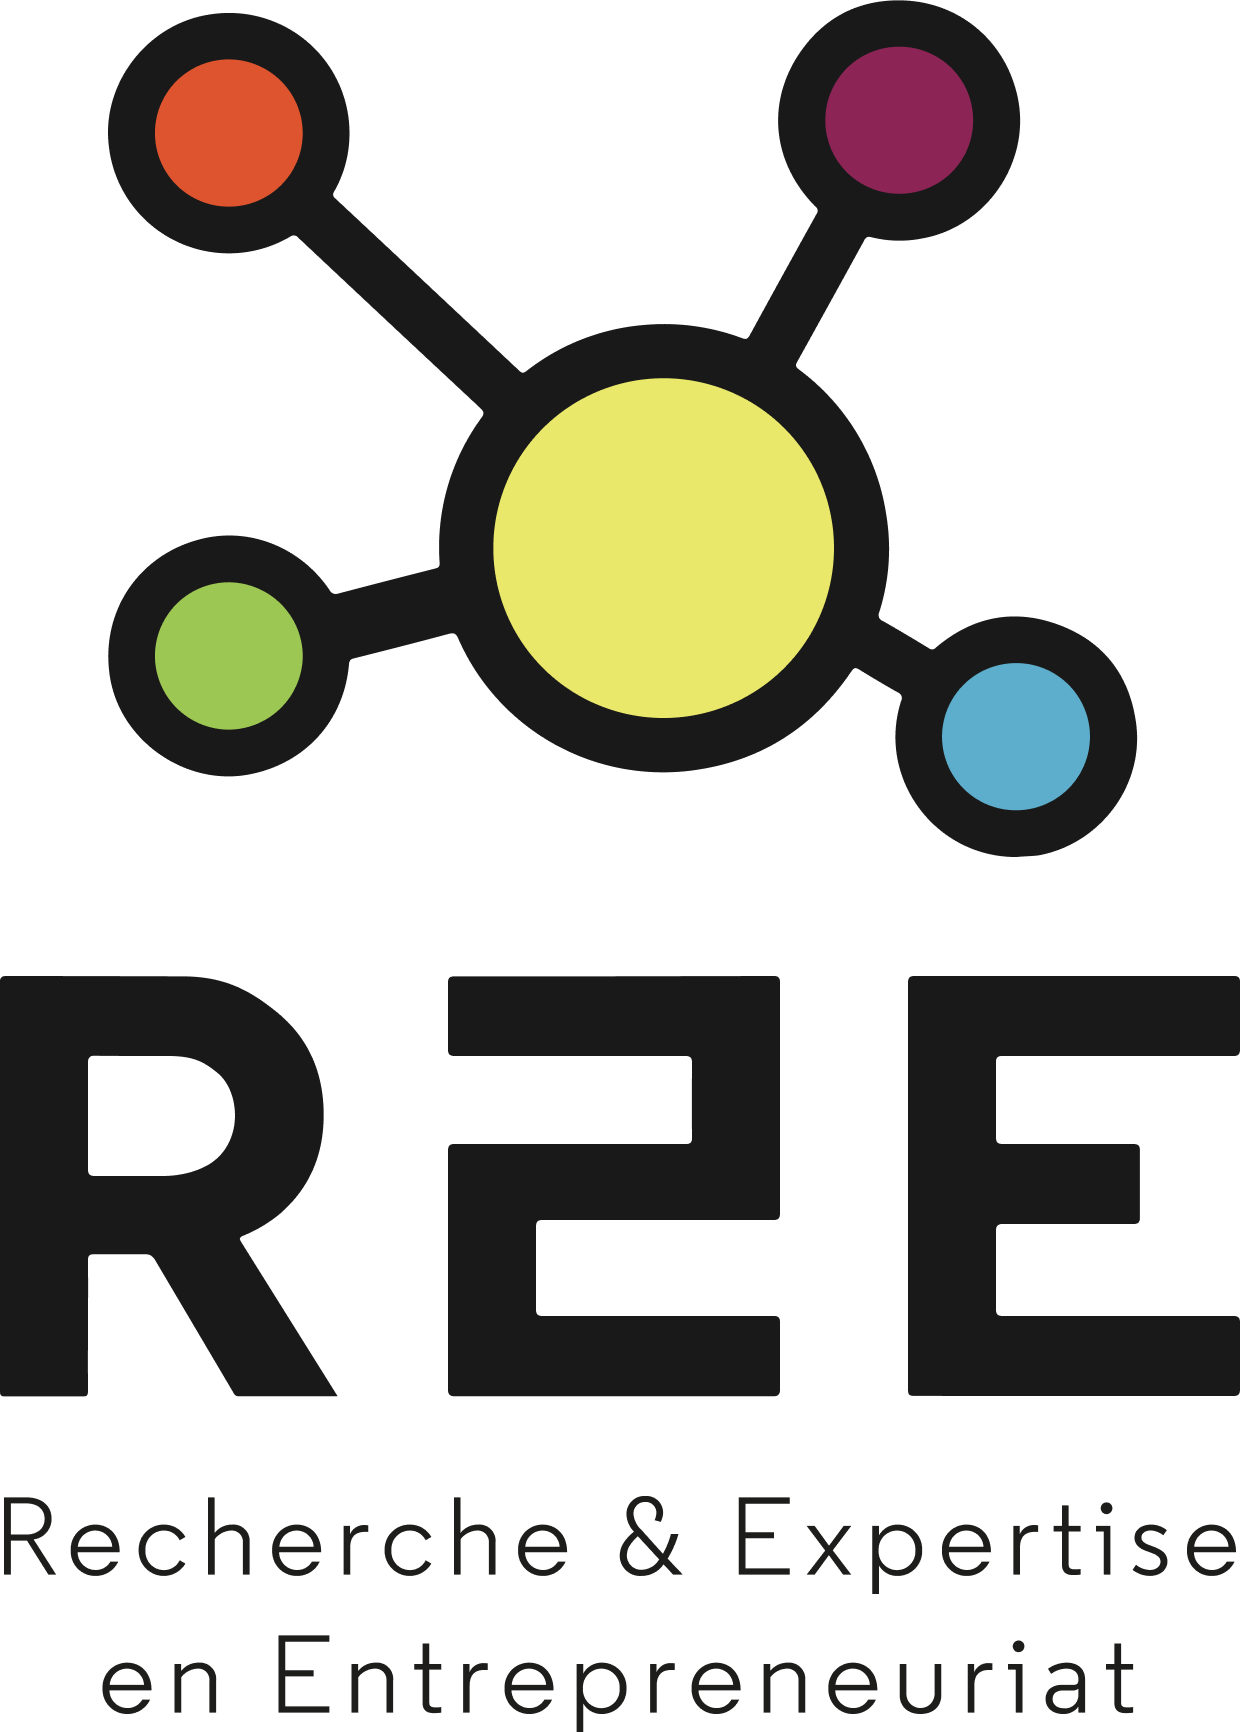 You are currently viewing Entrepreneuriat : le R2E développe sa plateforme collaborative